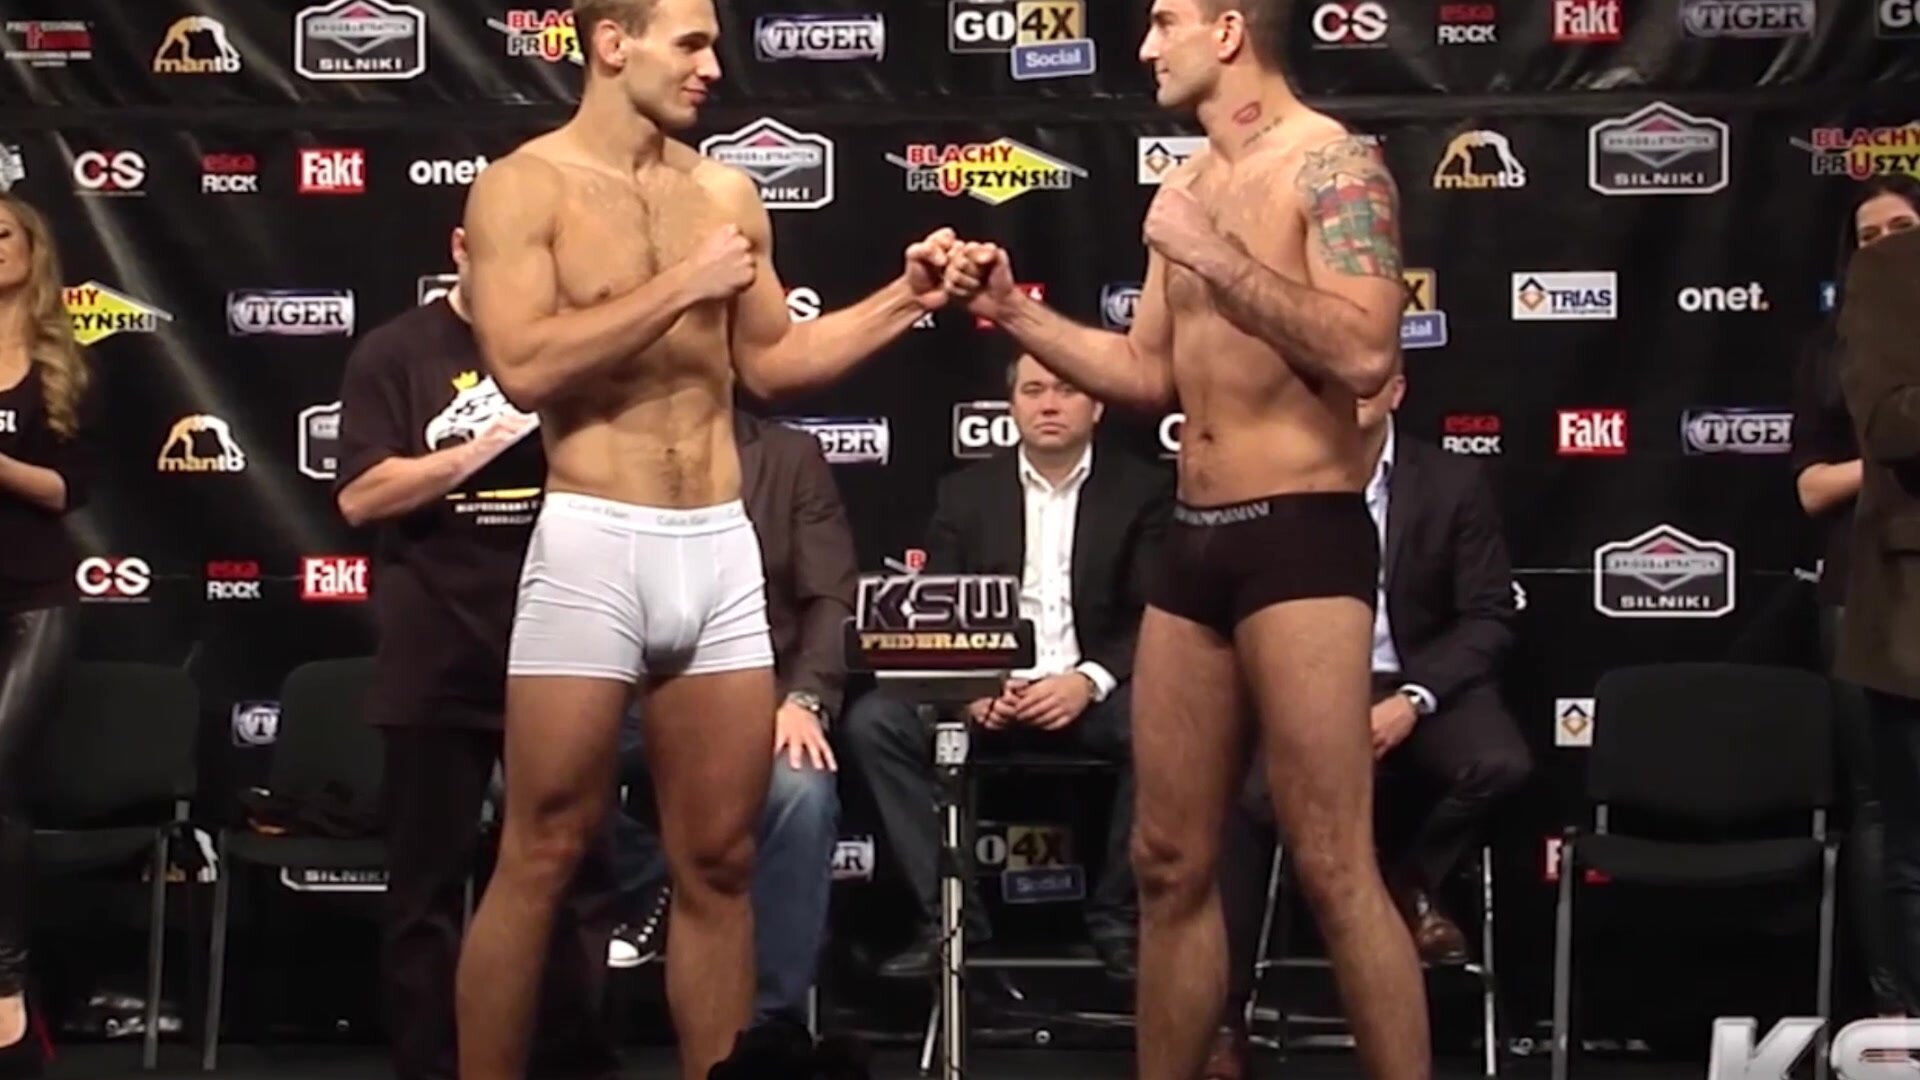 weigh in, small bulge in white trunks